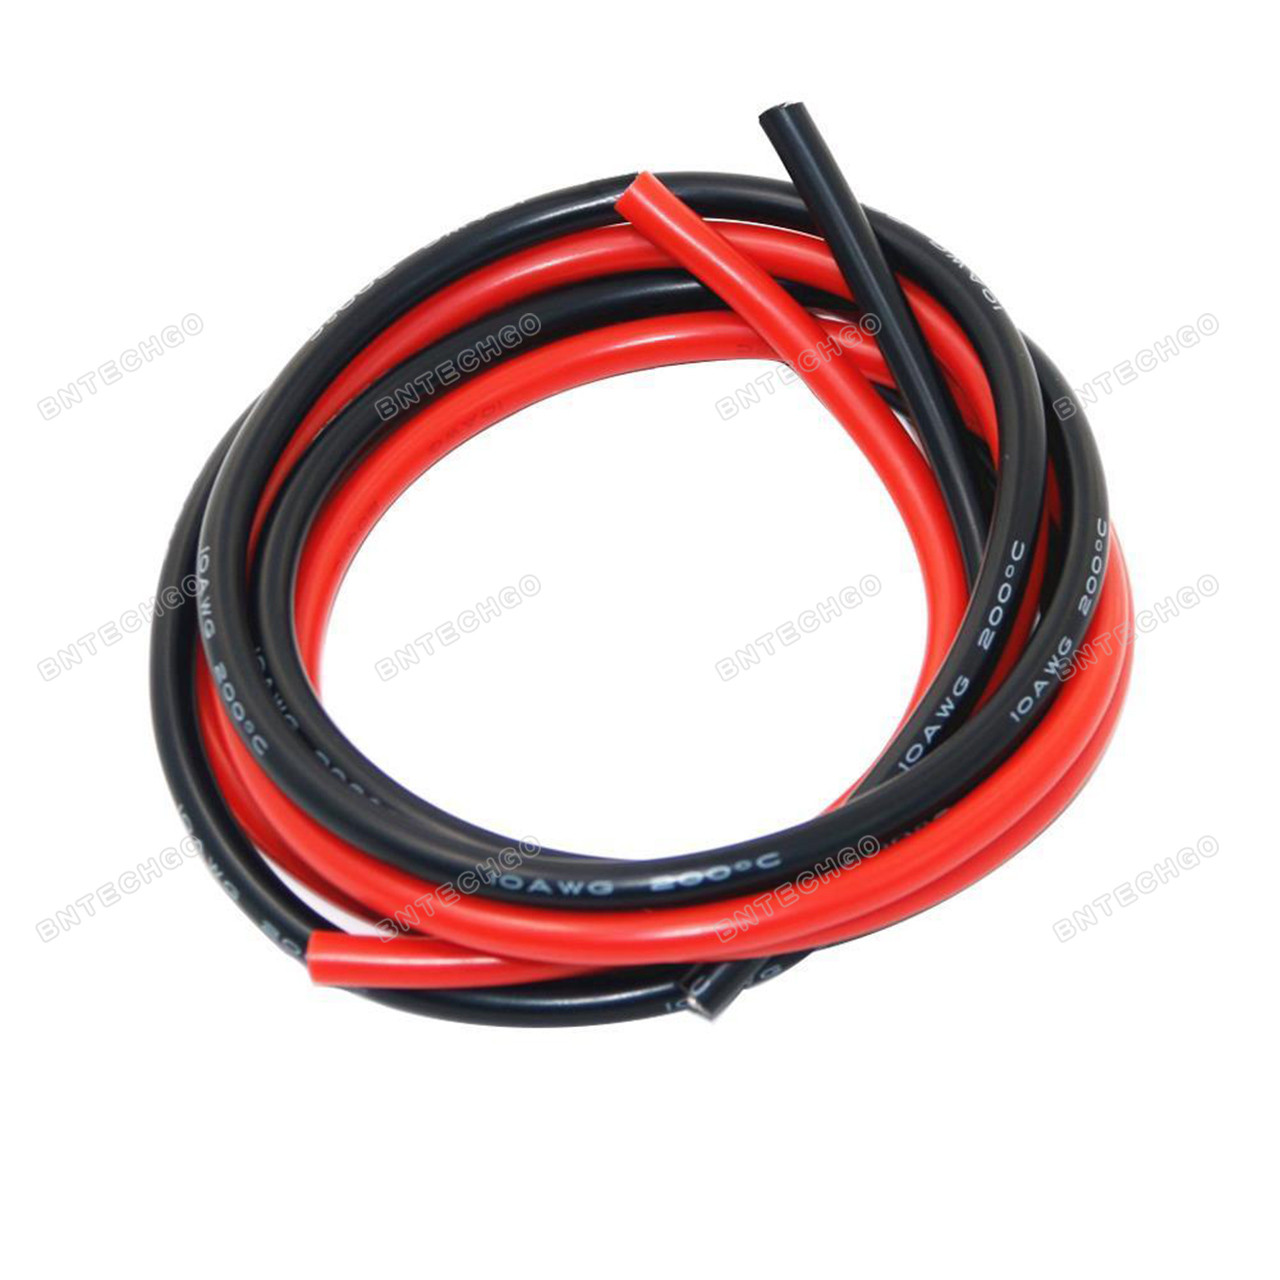 Acer Racing 10 Gauge Silicone Wire 10 Feet - 10 AWG Silicone Wire - Flexible Silicone Wire